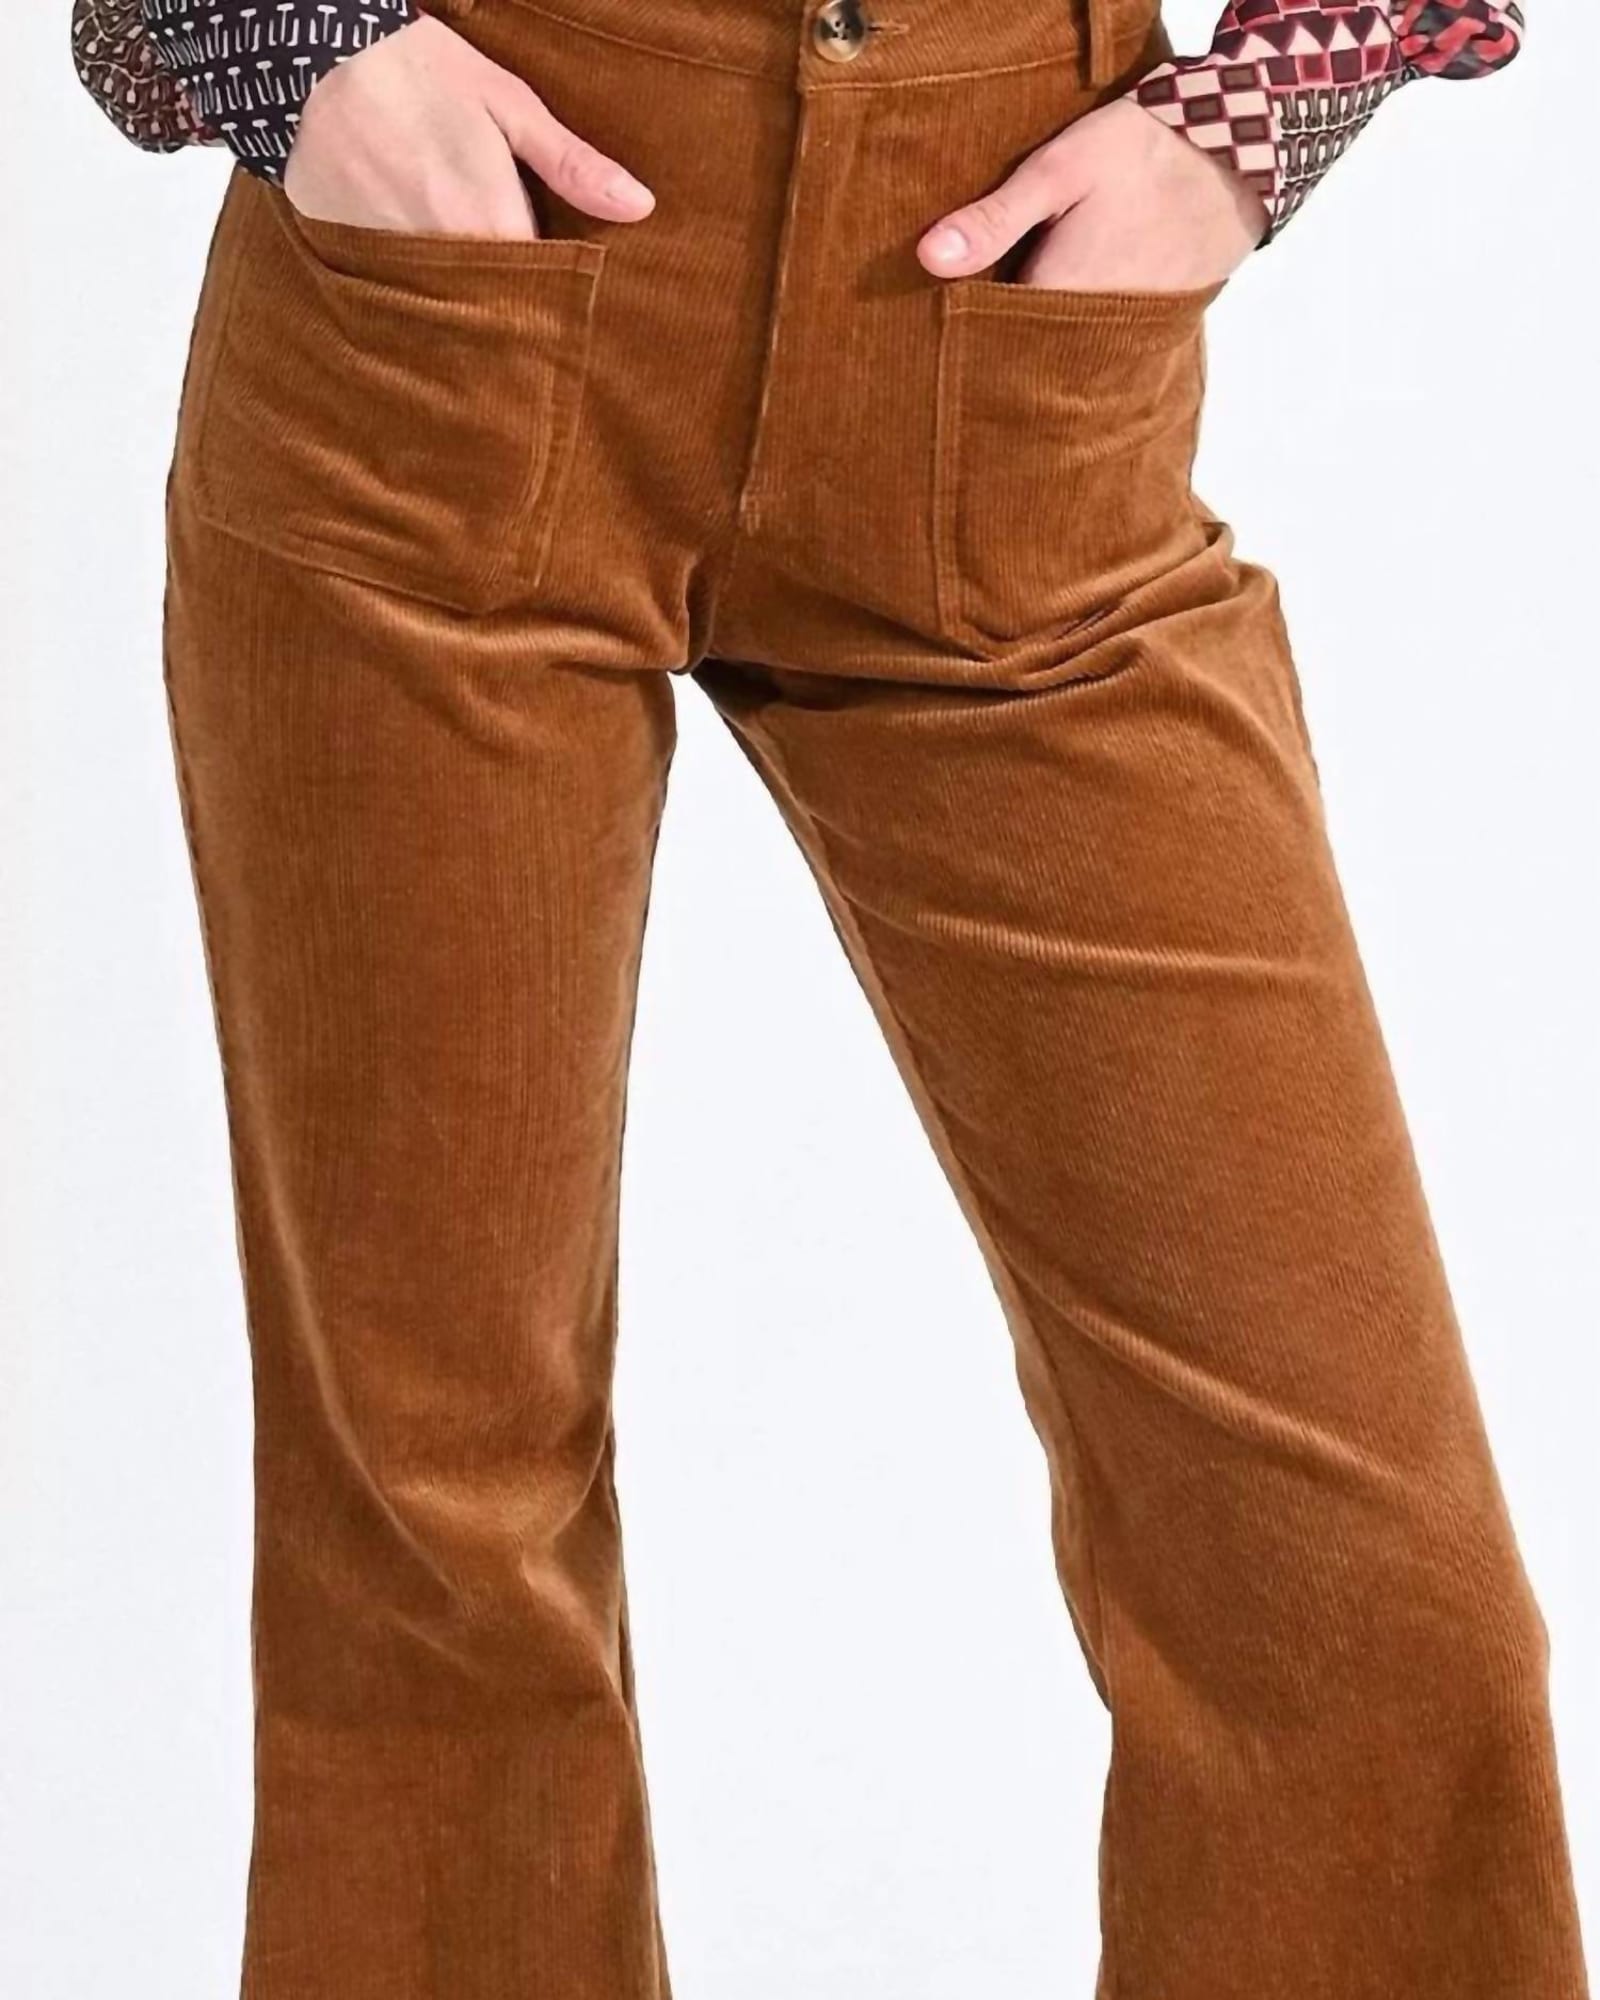 Flare Leg High Waisted Corduroys Pants In Camel | Camel